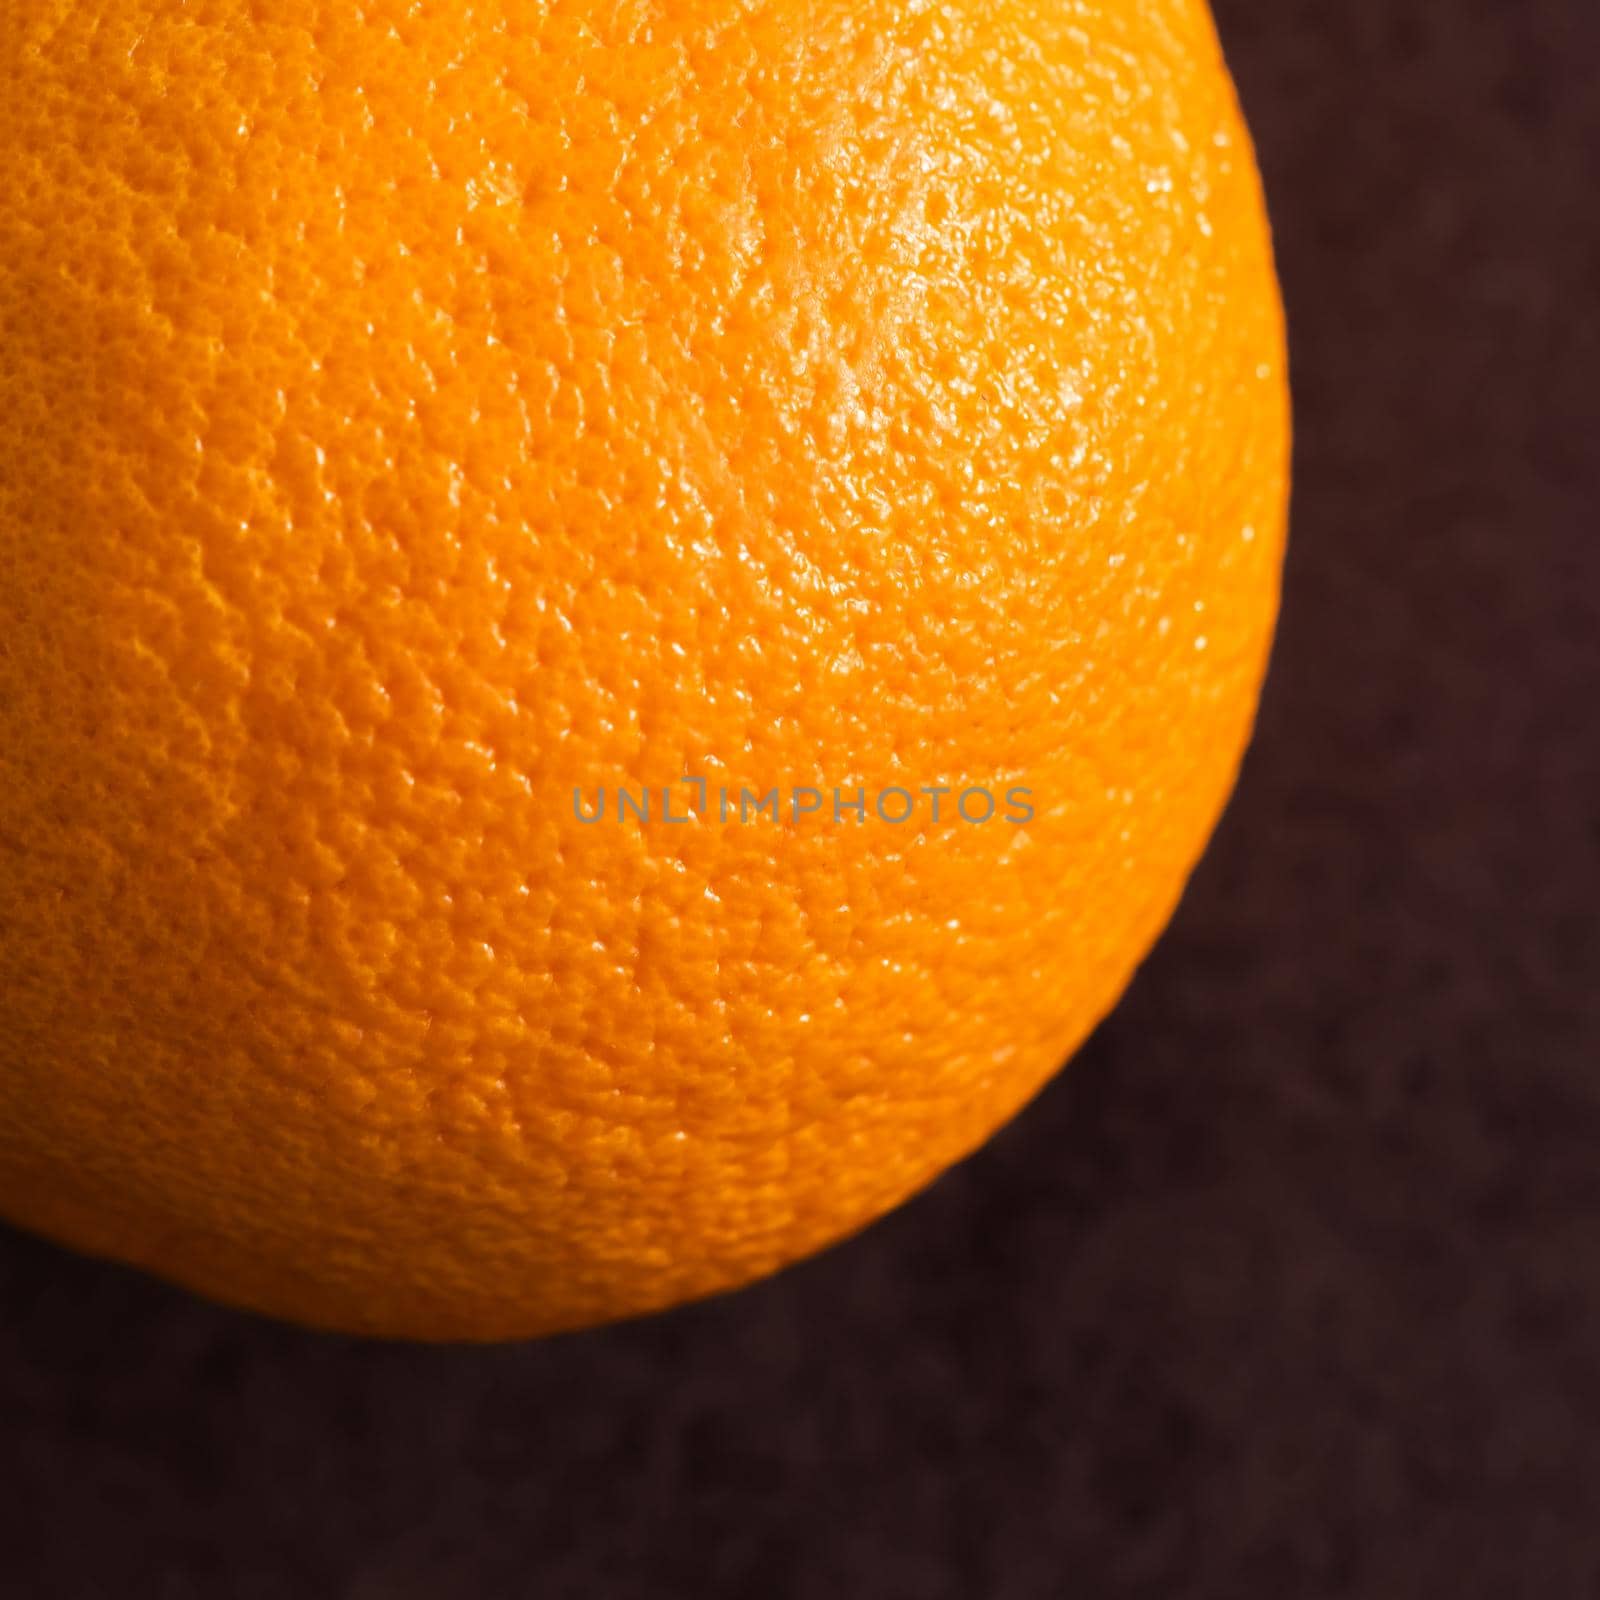 Ripe orange on a brown background. Close up view.